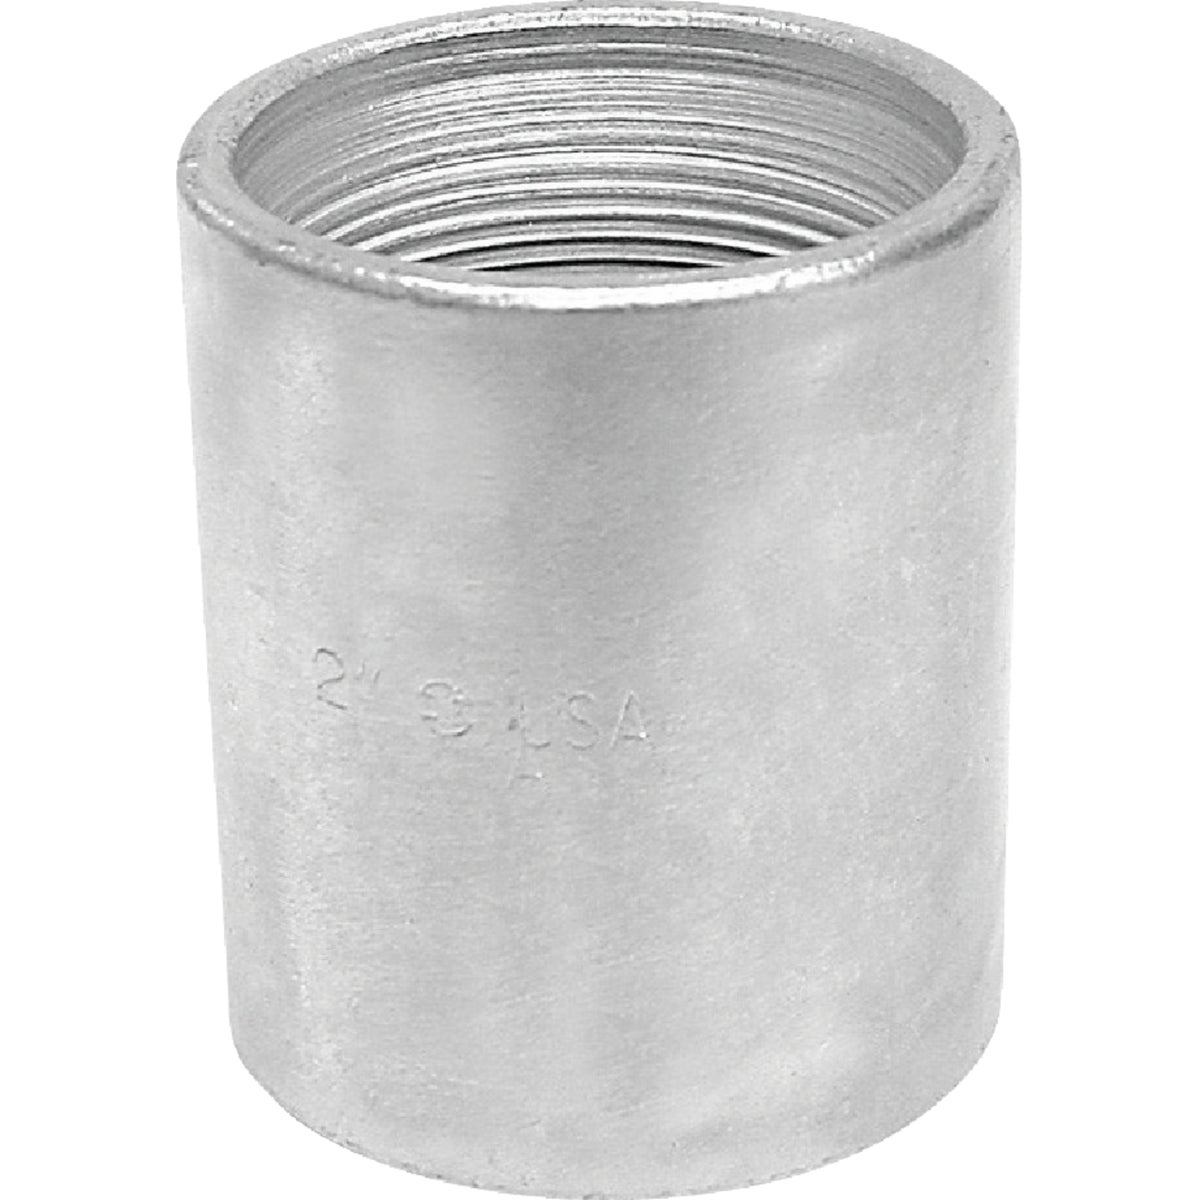 Southland 2 In. x 2 In. FPT Standard Merchant Galvanized Coupling